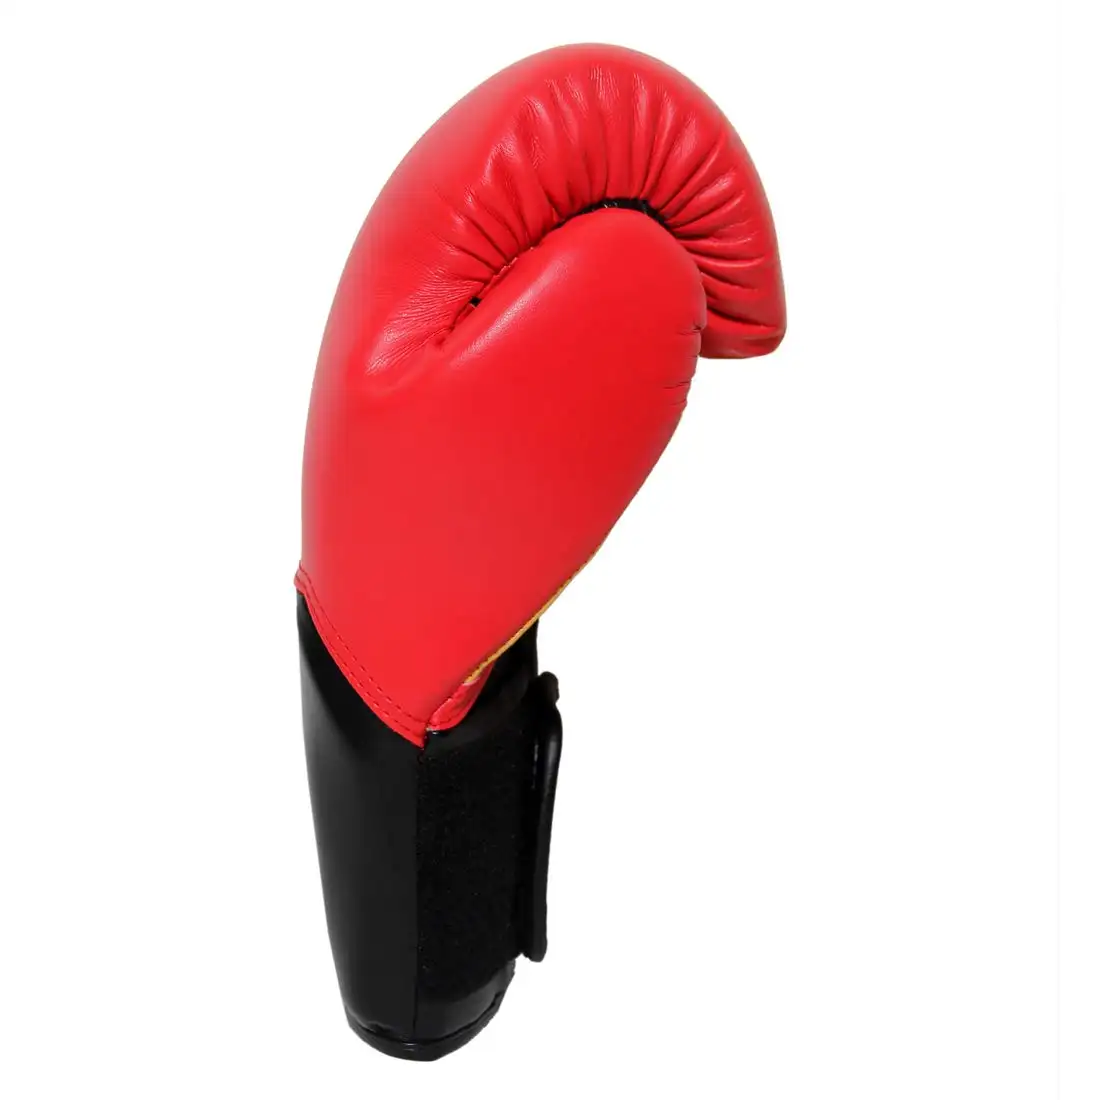 Most Selling Windproof Boxing PRO Fight Gloves for Sports and Gym Use from Indian Manufacturer and Supplier